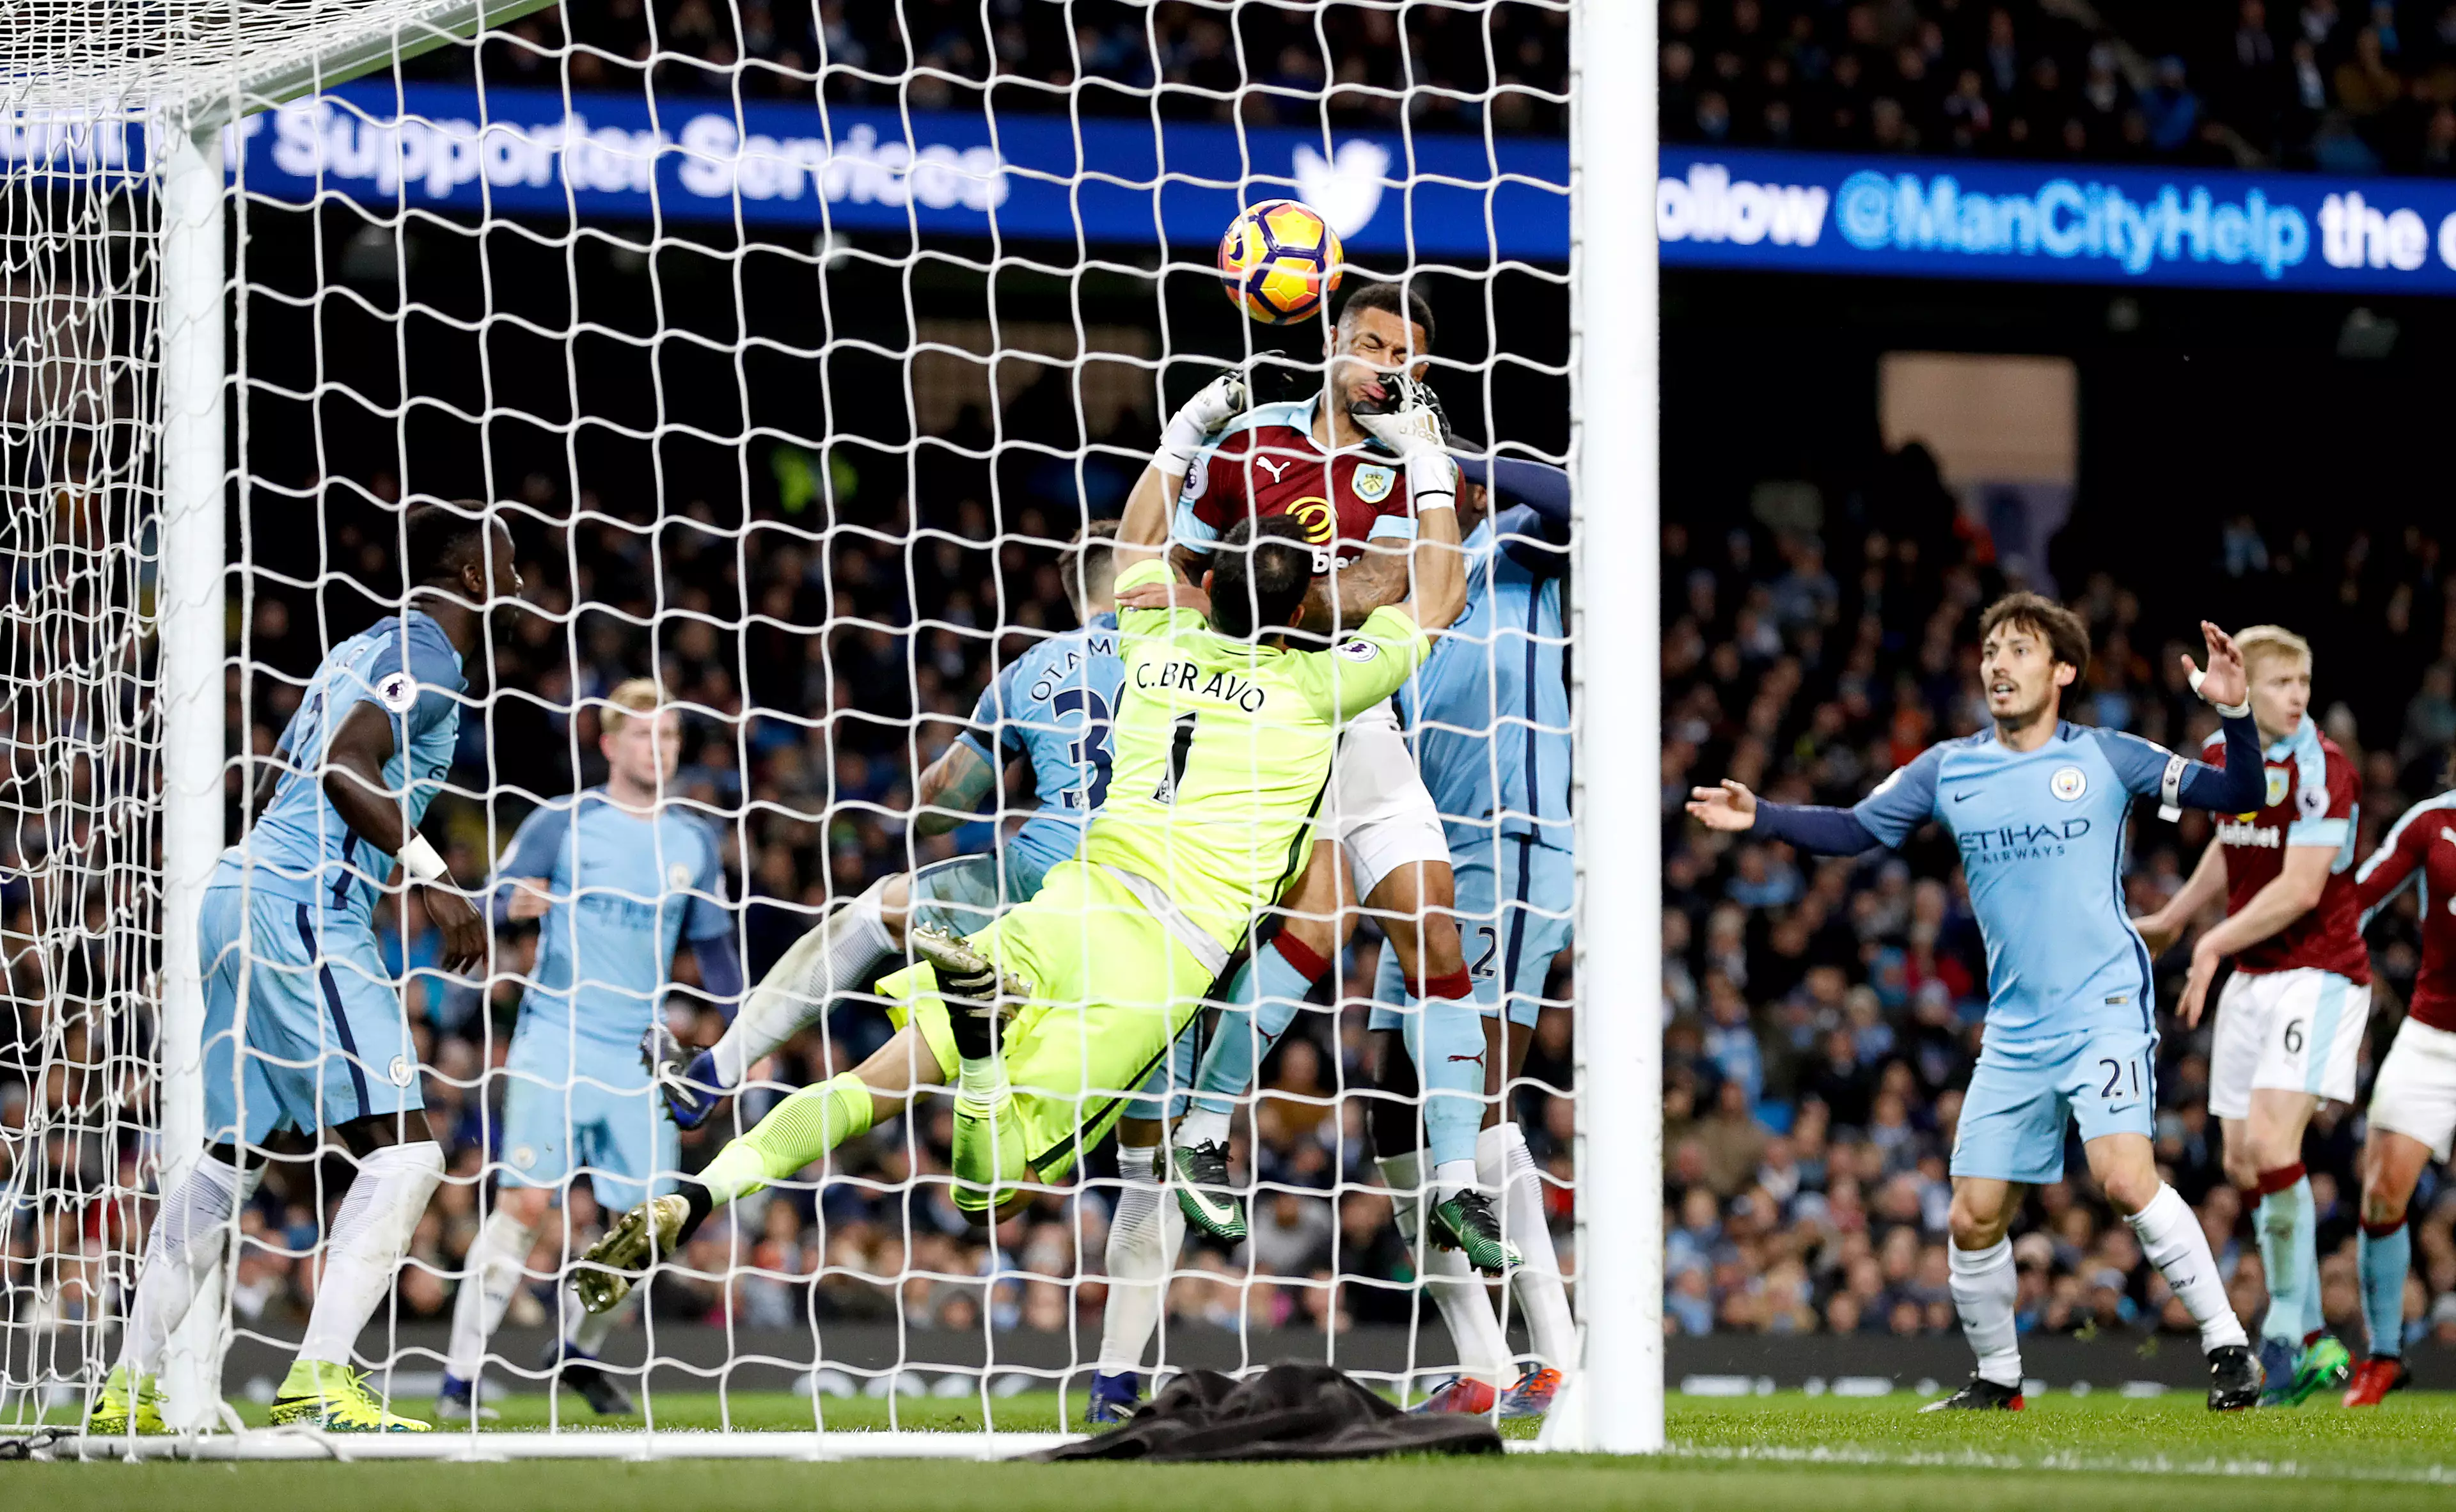 WATCH: Claudio Bravo Has Another Shocker For Manchester City